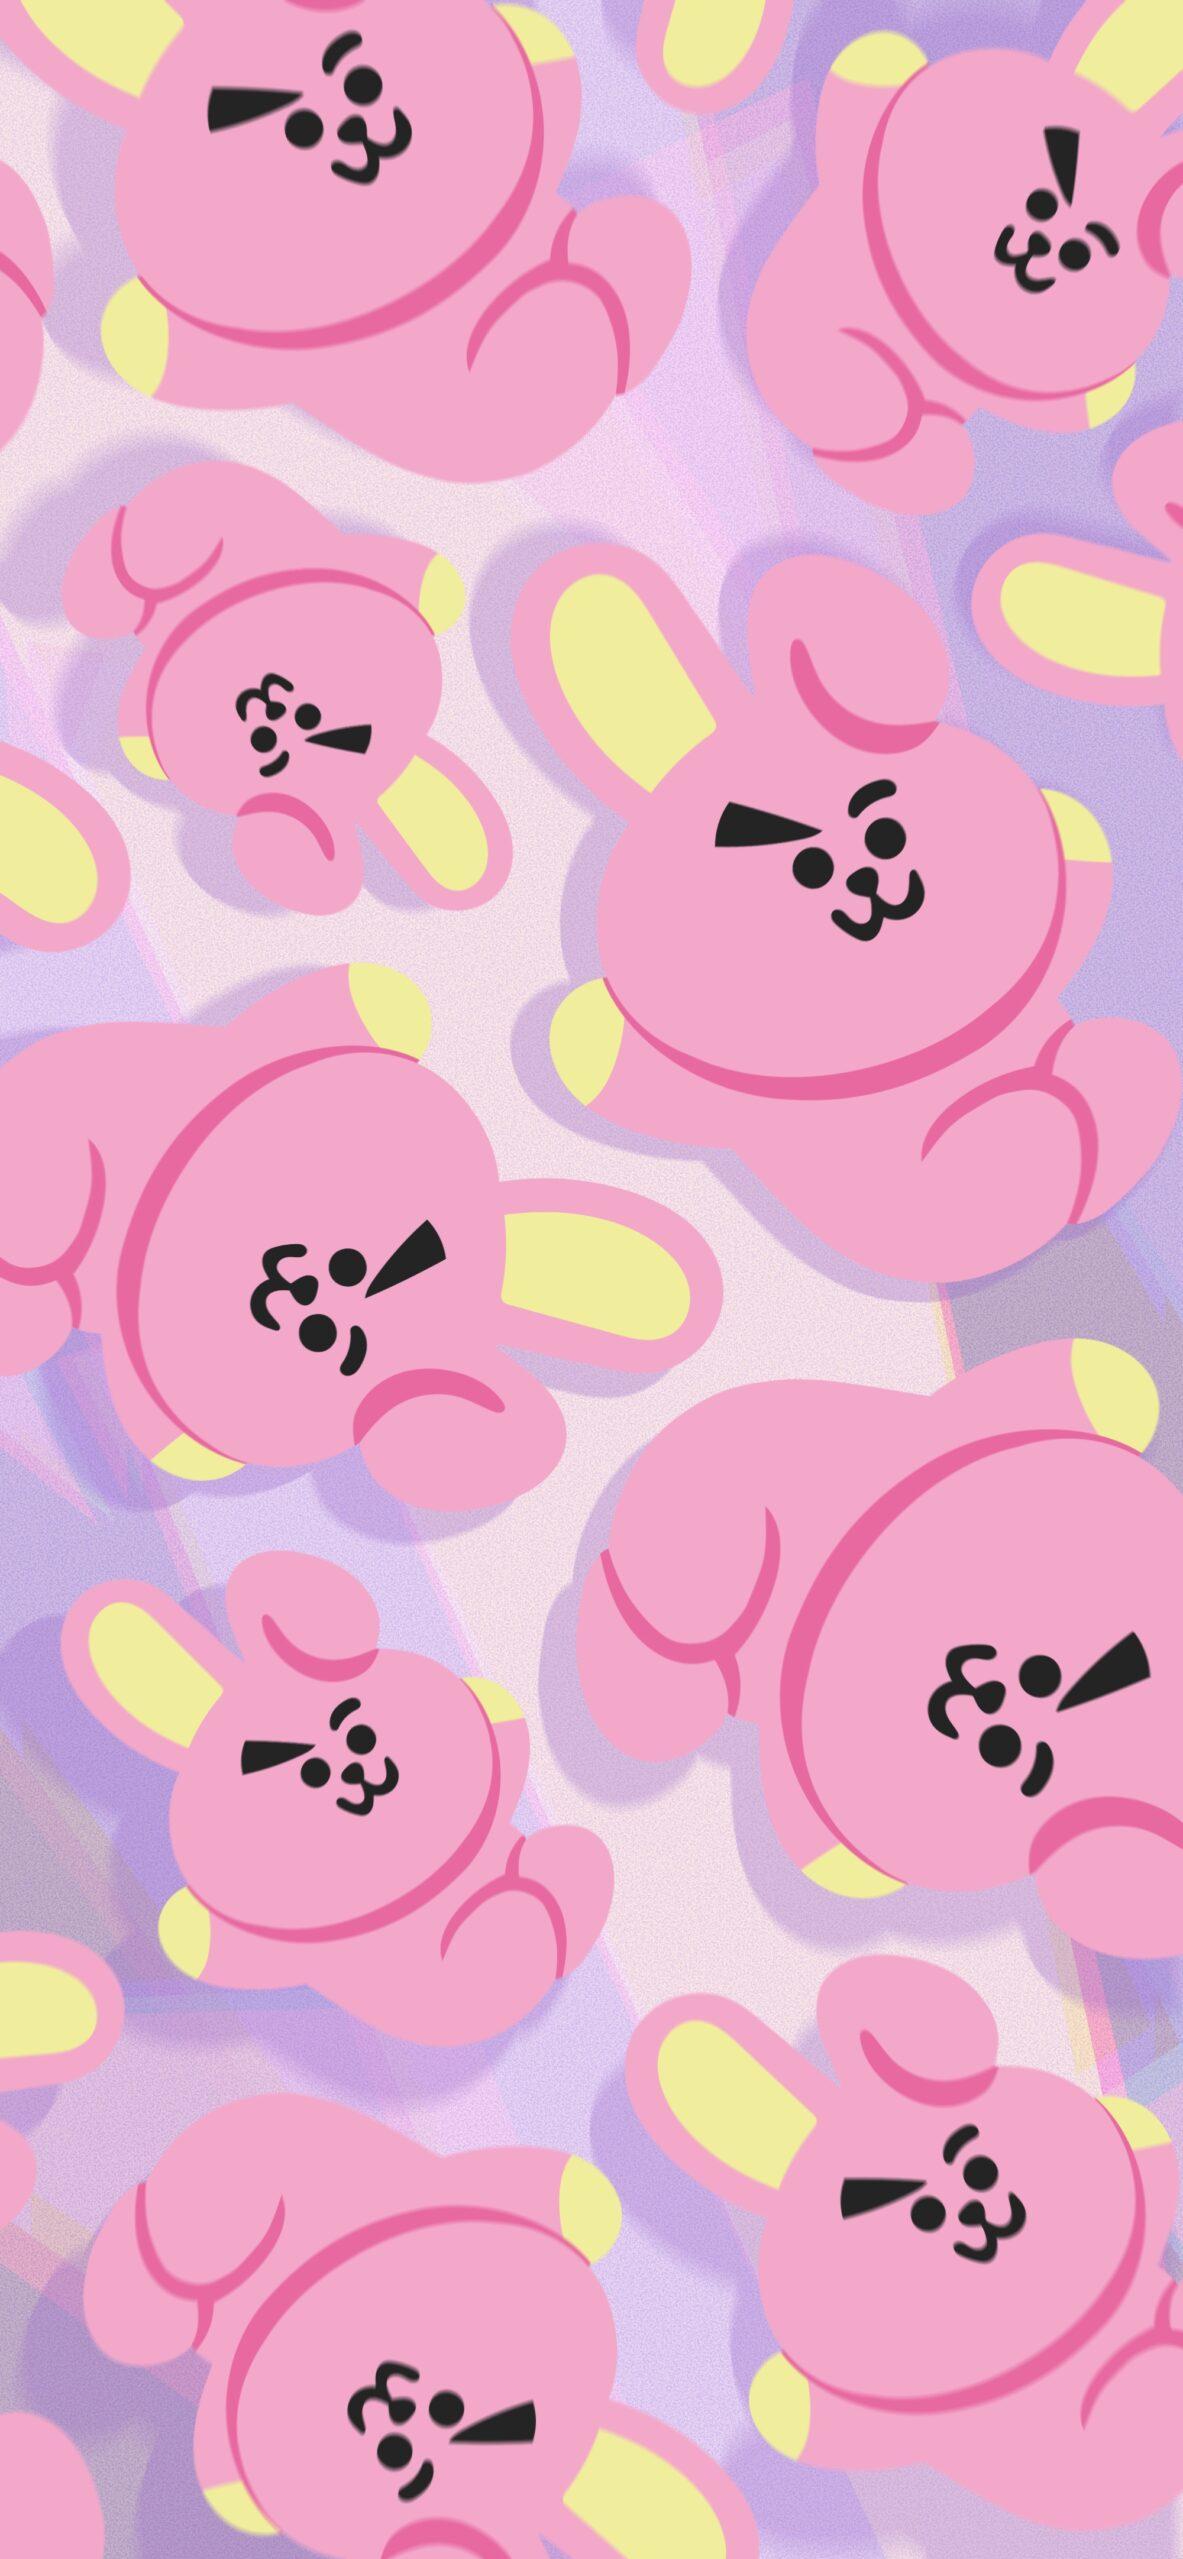 Bts Bt21 Cooky Abstract Wallpaper Cute For iPhone